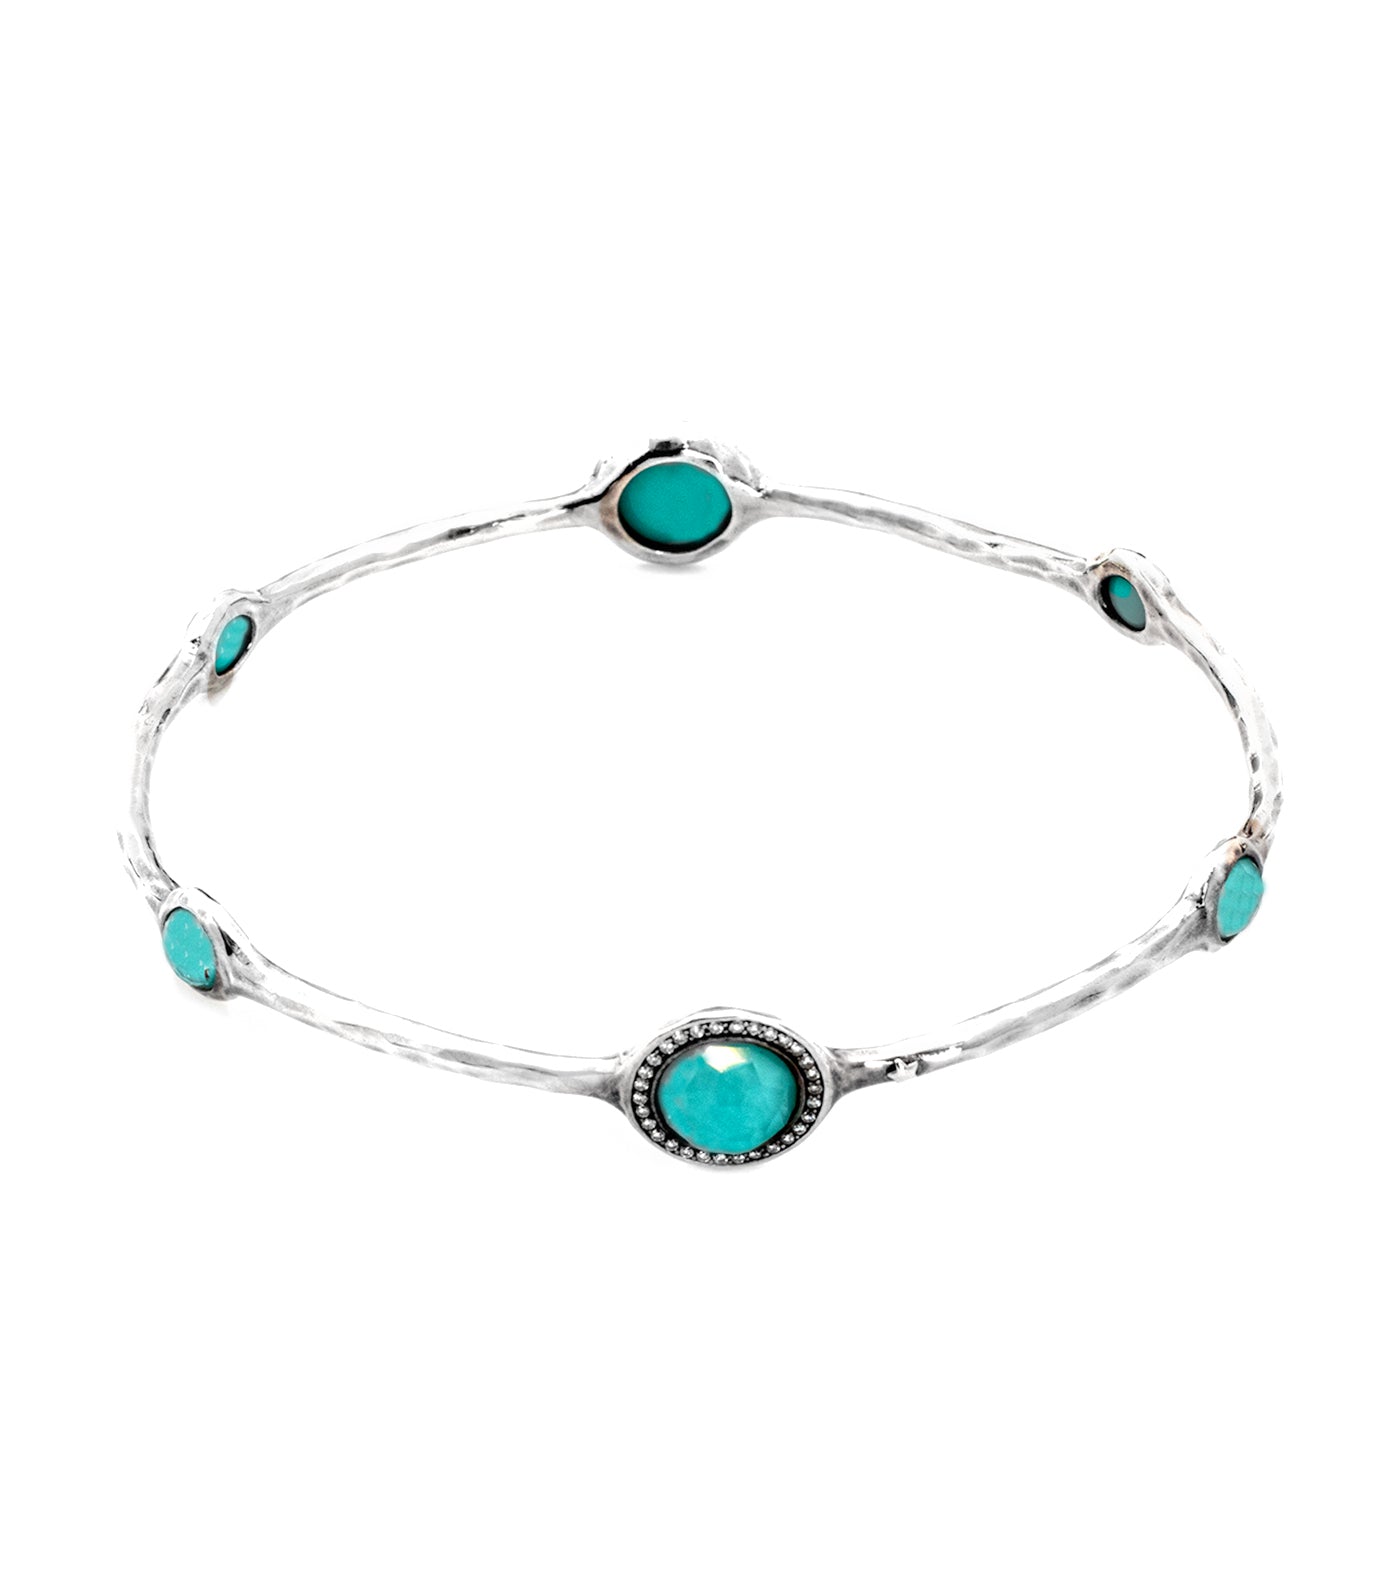 ippolita sterling silver stella bangle in turquoise doublet with diamonds 